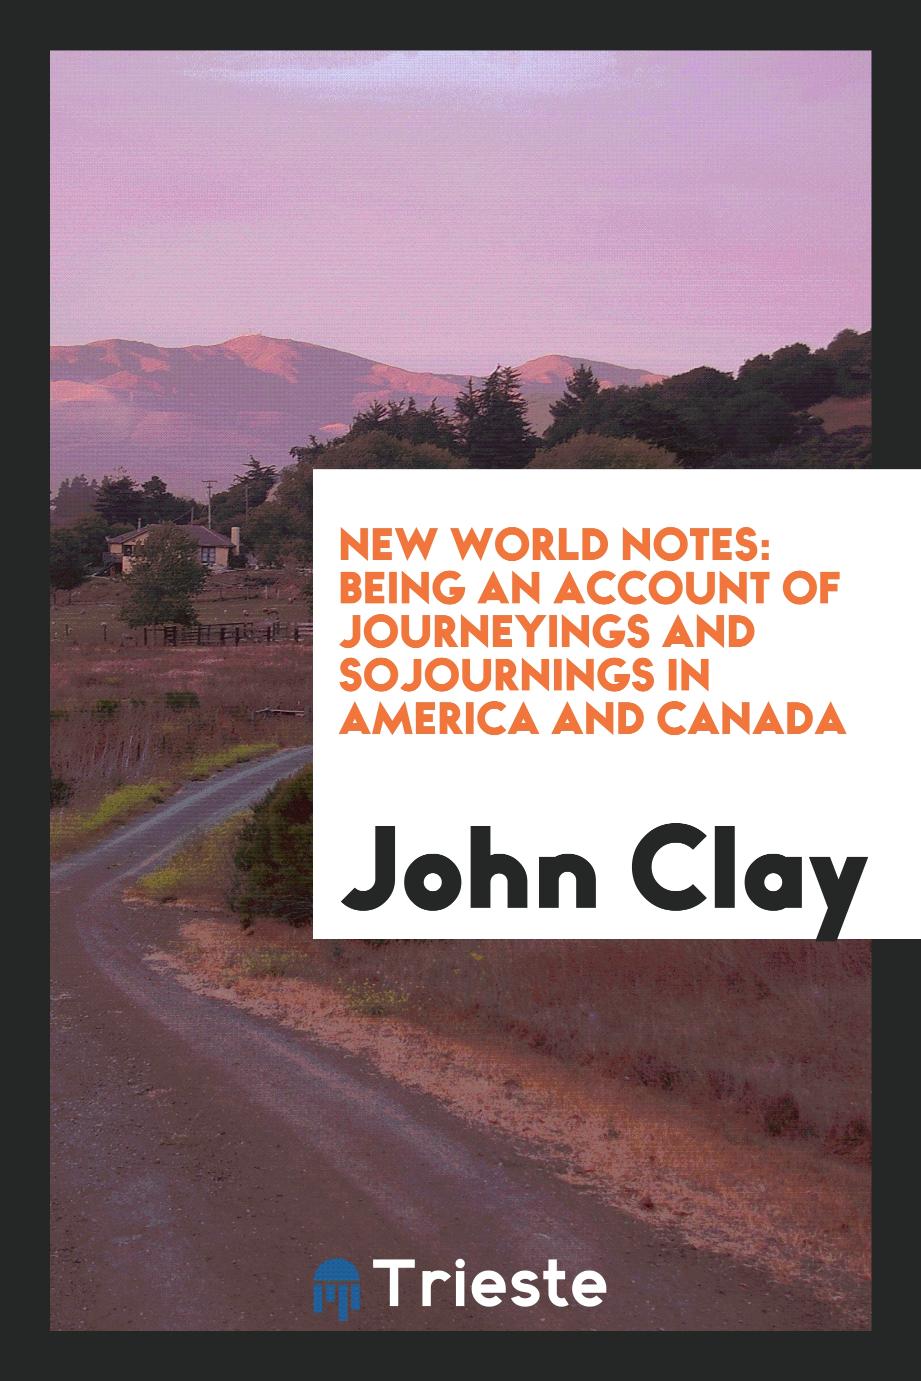 New world notes: being an account of journeyings and sojournings in America and Canada